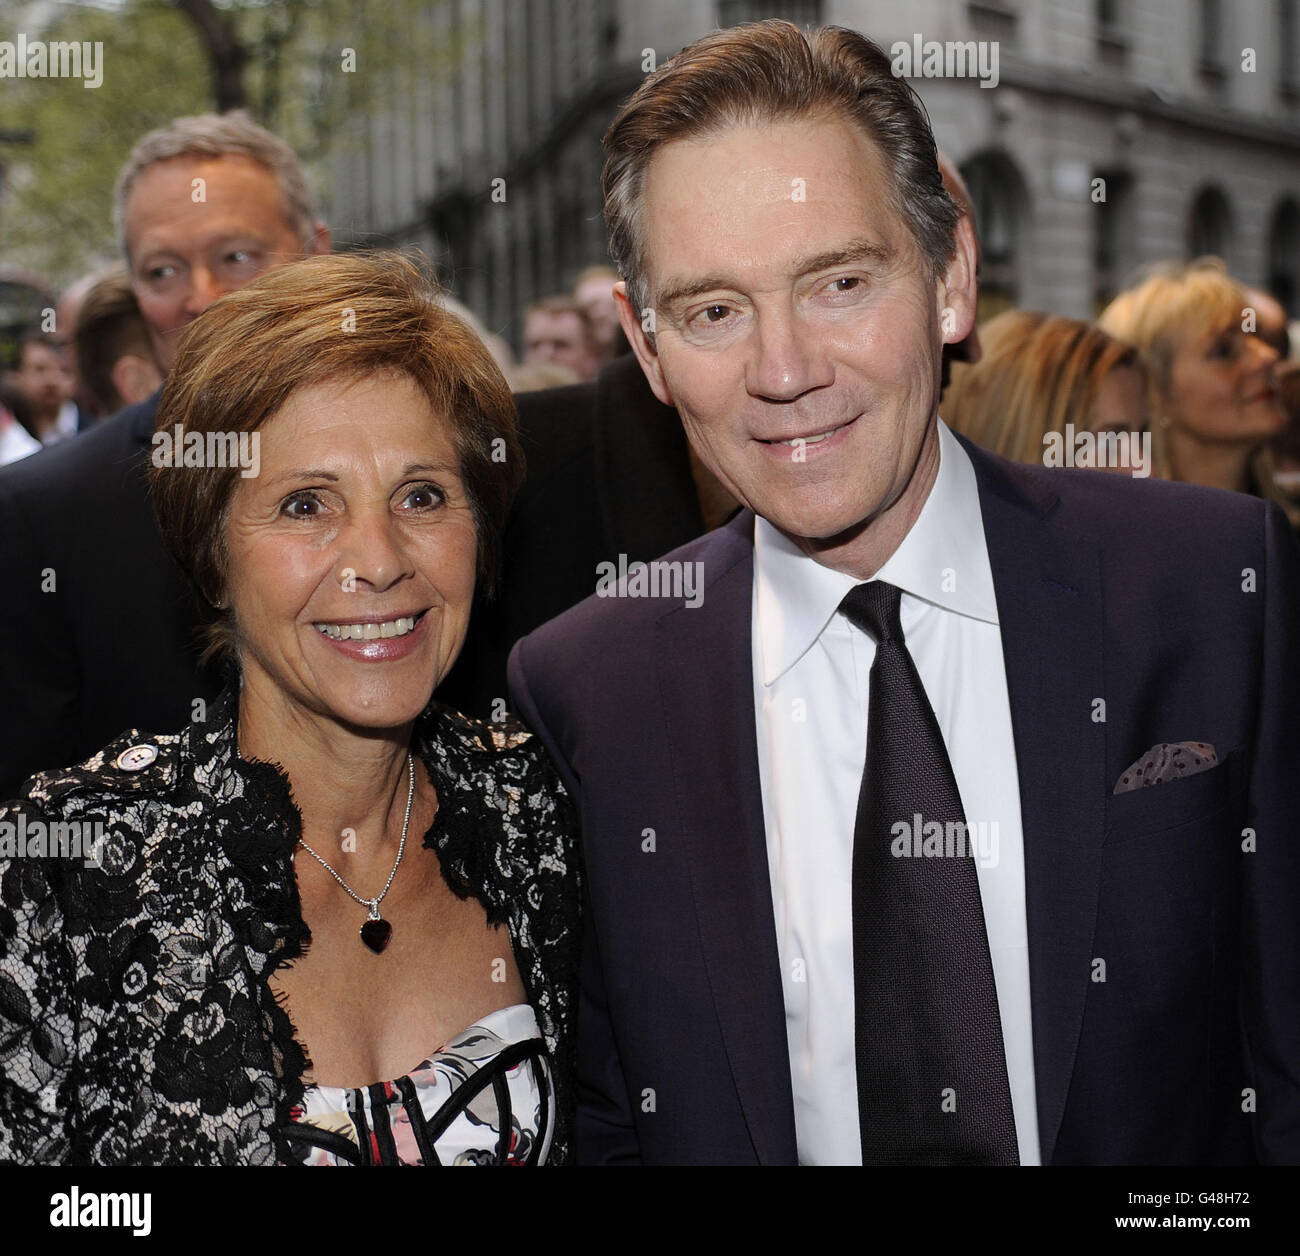 Anthony Andrews and wife Georgina Simpson arrive at The Novello Theatre, The Aldwych, London, for the press night of Betty Blue Eyes. Stock Photo